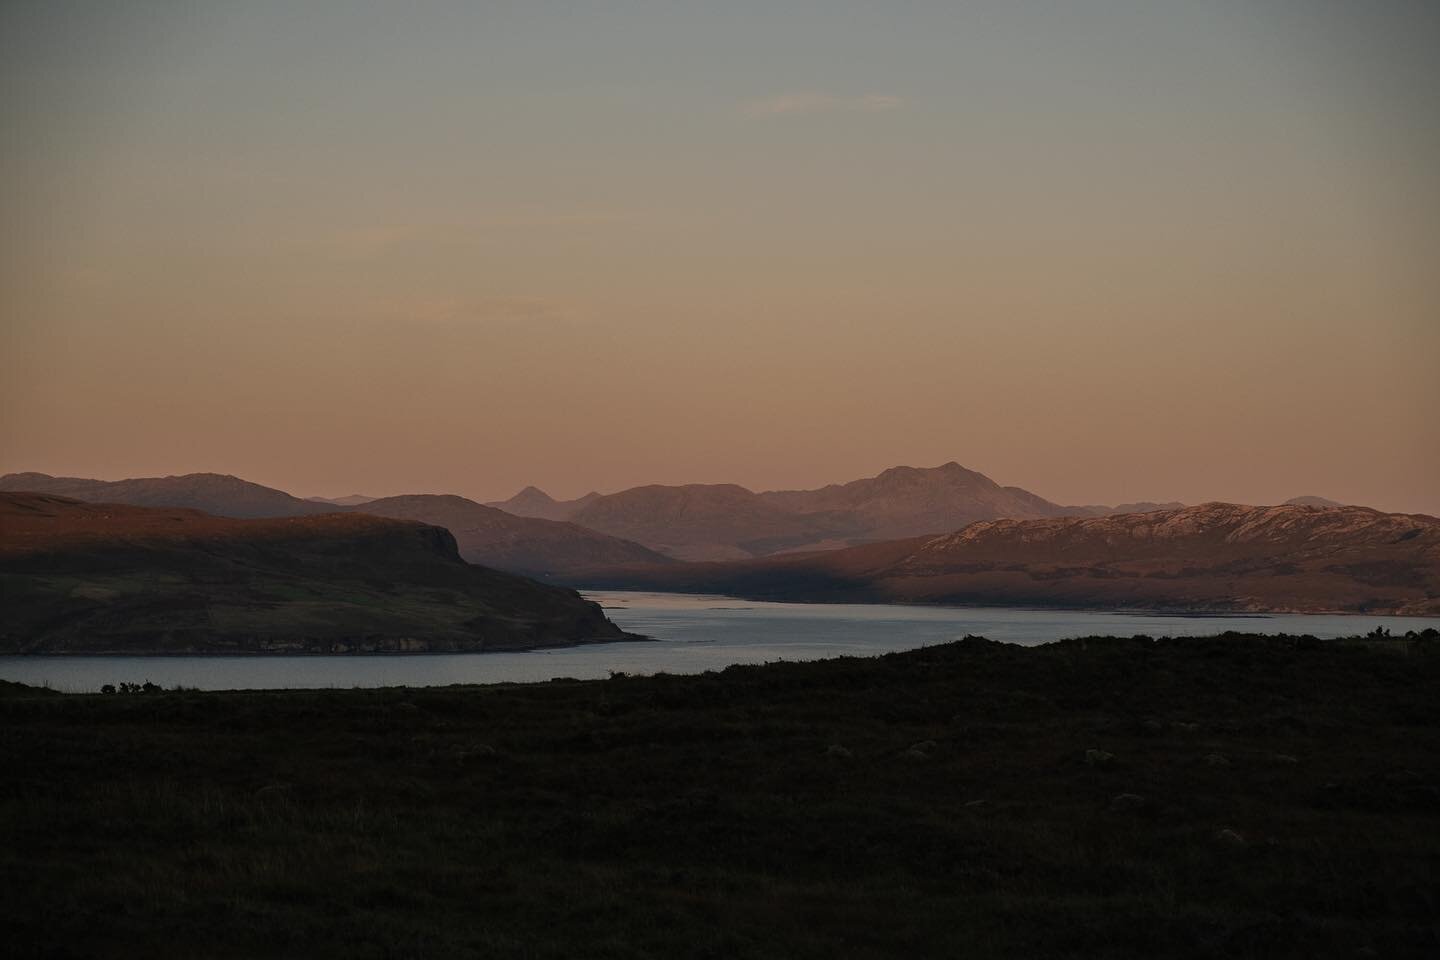 Today I seem to be particularly short on words, but here is a sunset on Skye.